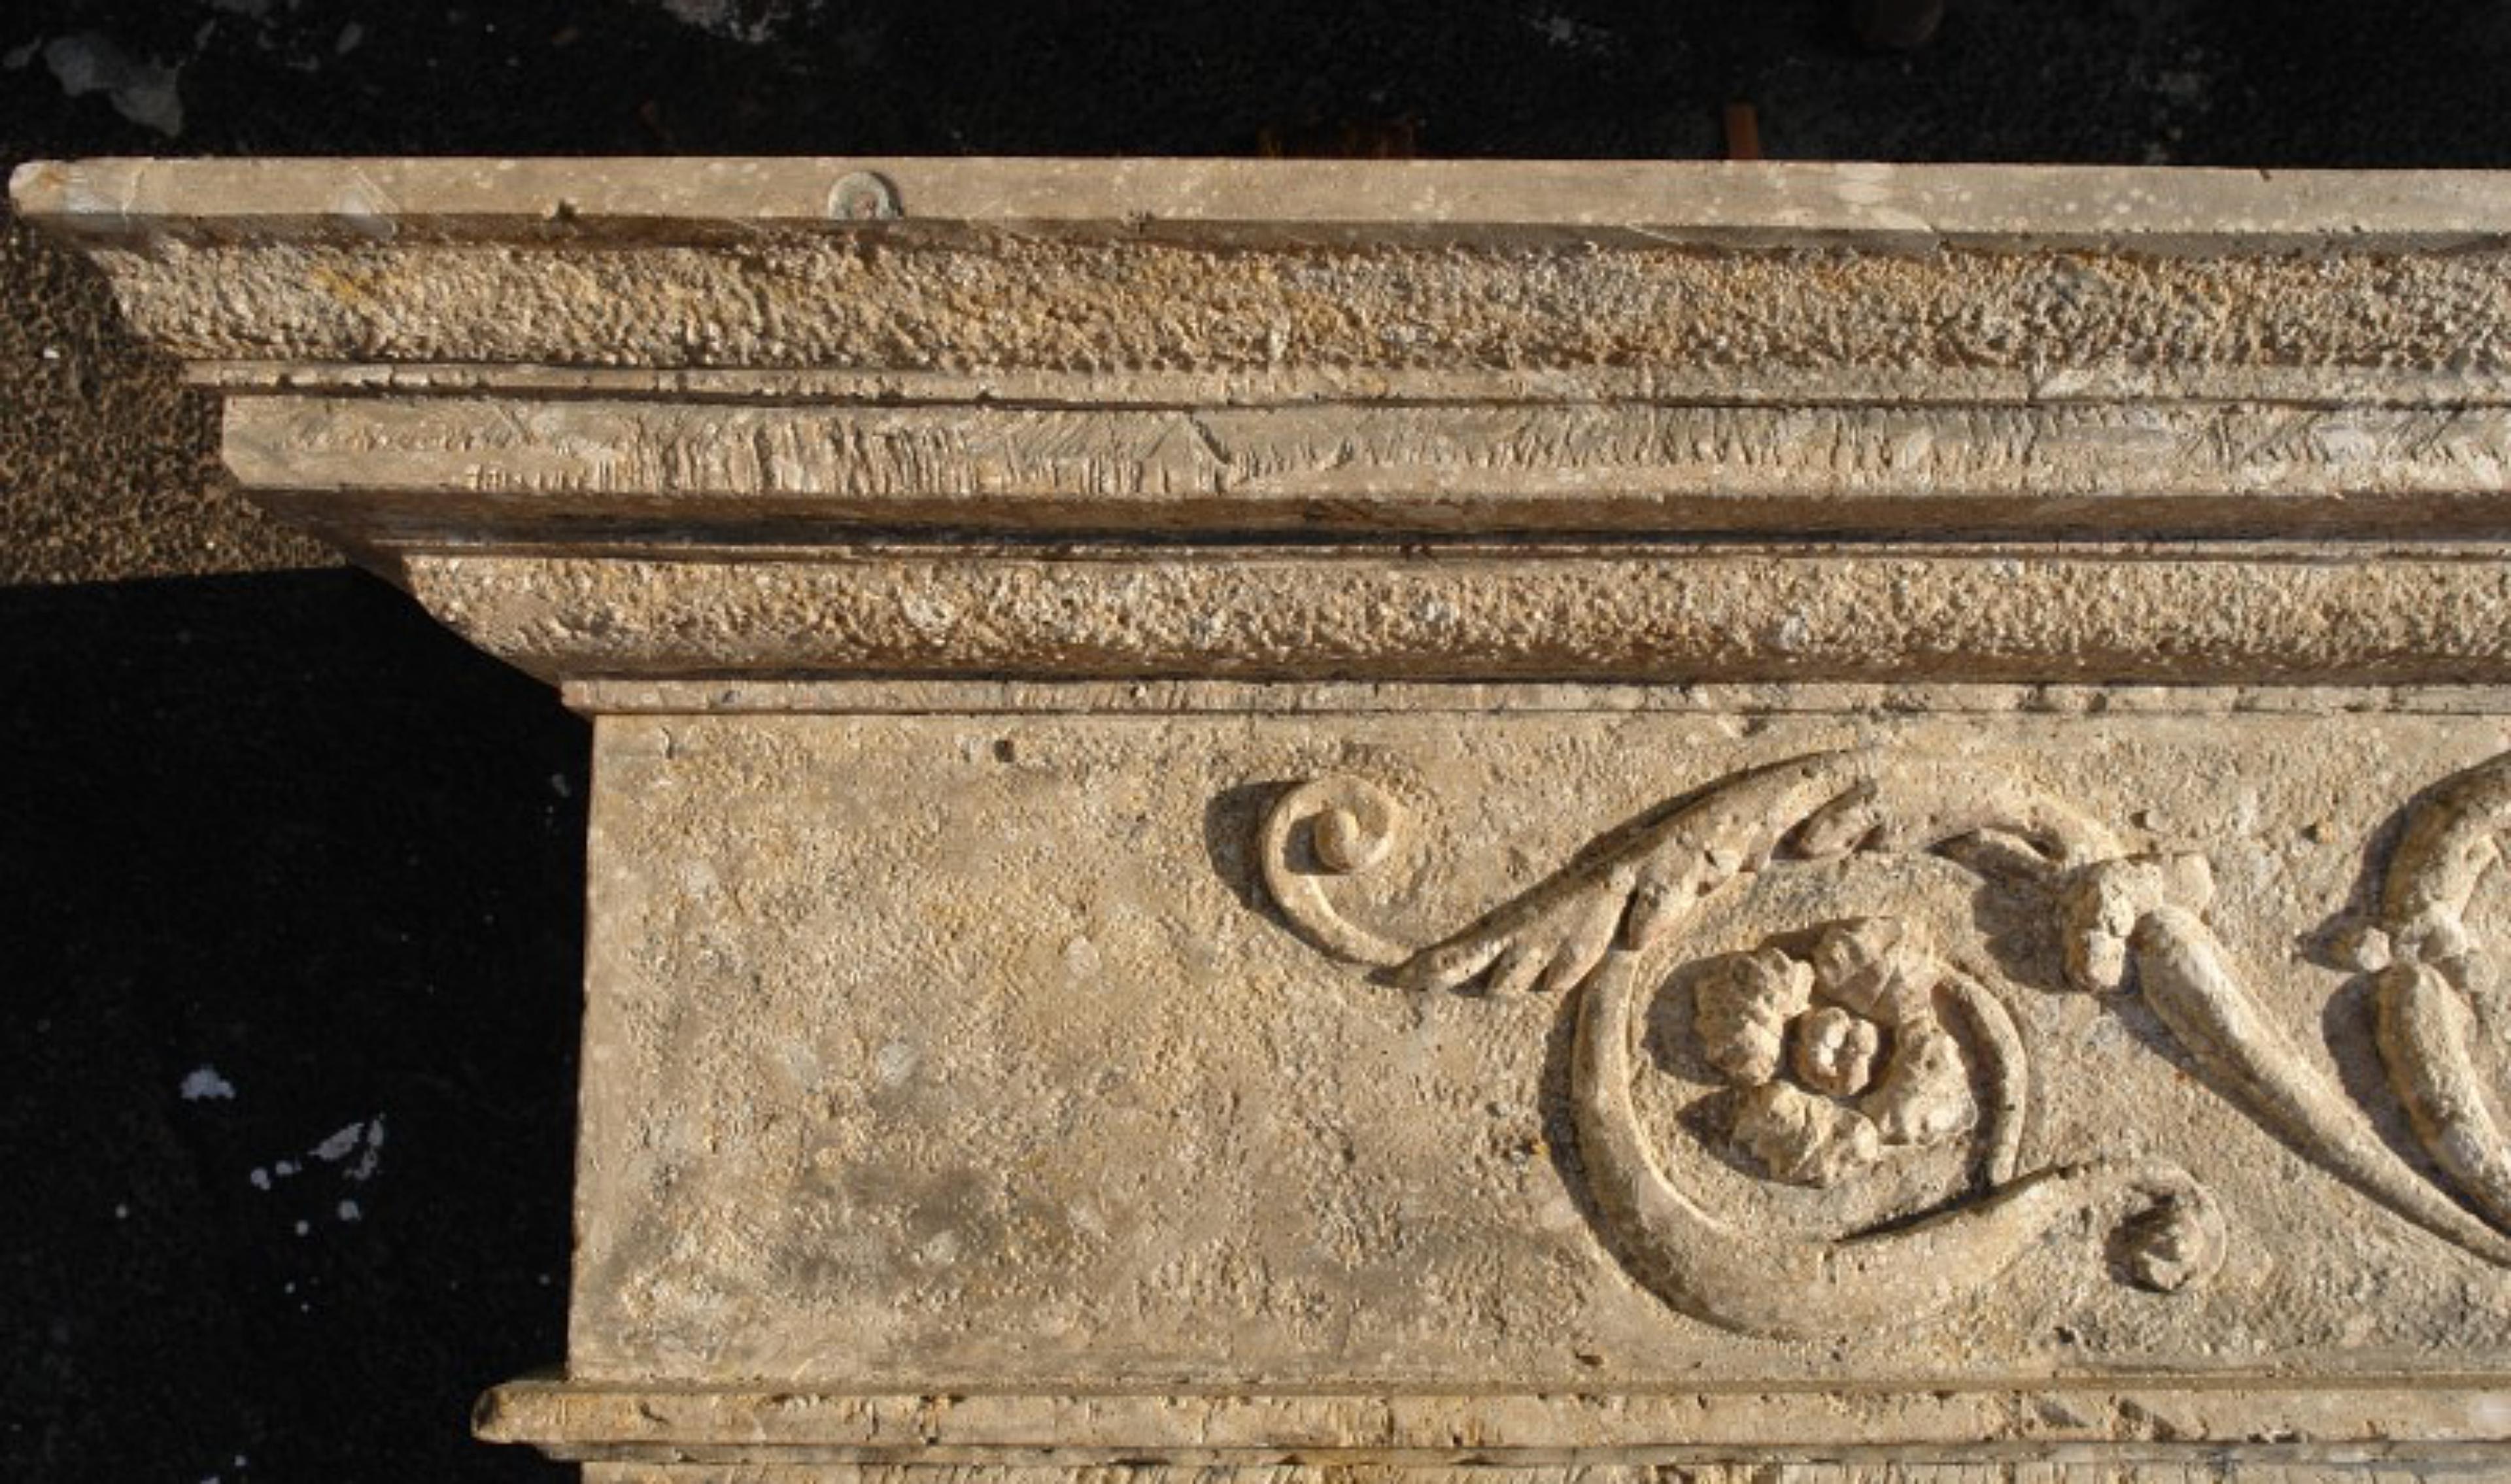 Large Italian stone fireplace with Medicean emblem.
Early 20th century
Large fireplace in limestone with lintel carved with plant motifs in Romanesque style and central Medici coat of arms.
HEIGHT 194 cm
WIDTH 250 cm
DEPTH 50 cm
WEIGHT 280